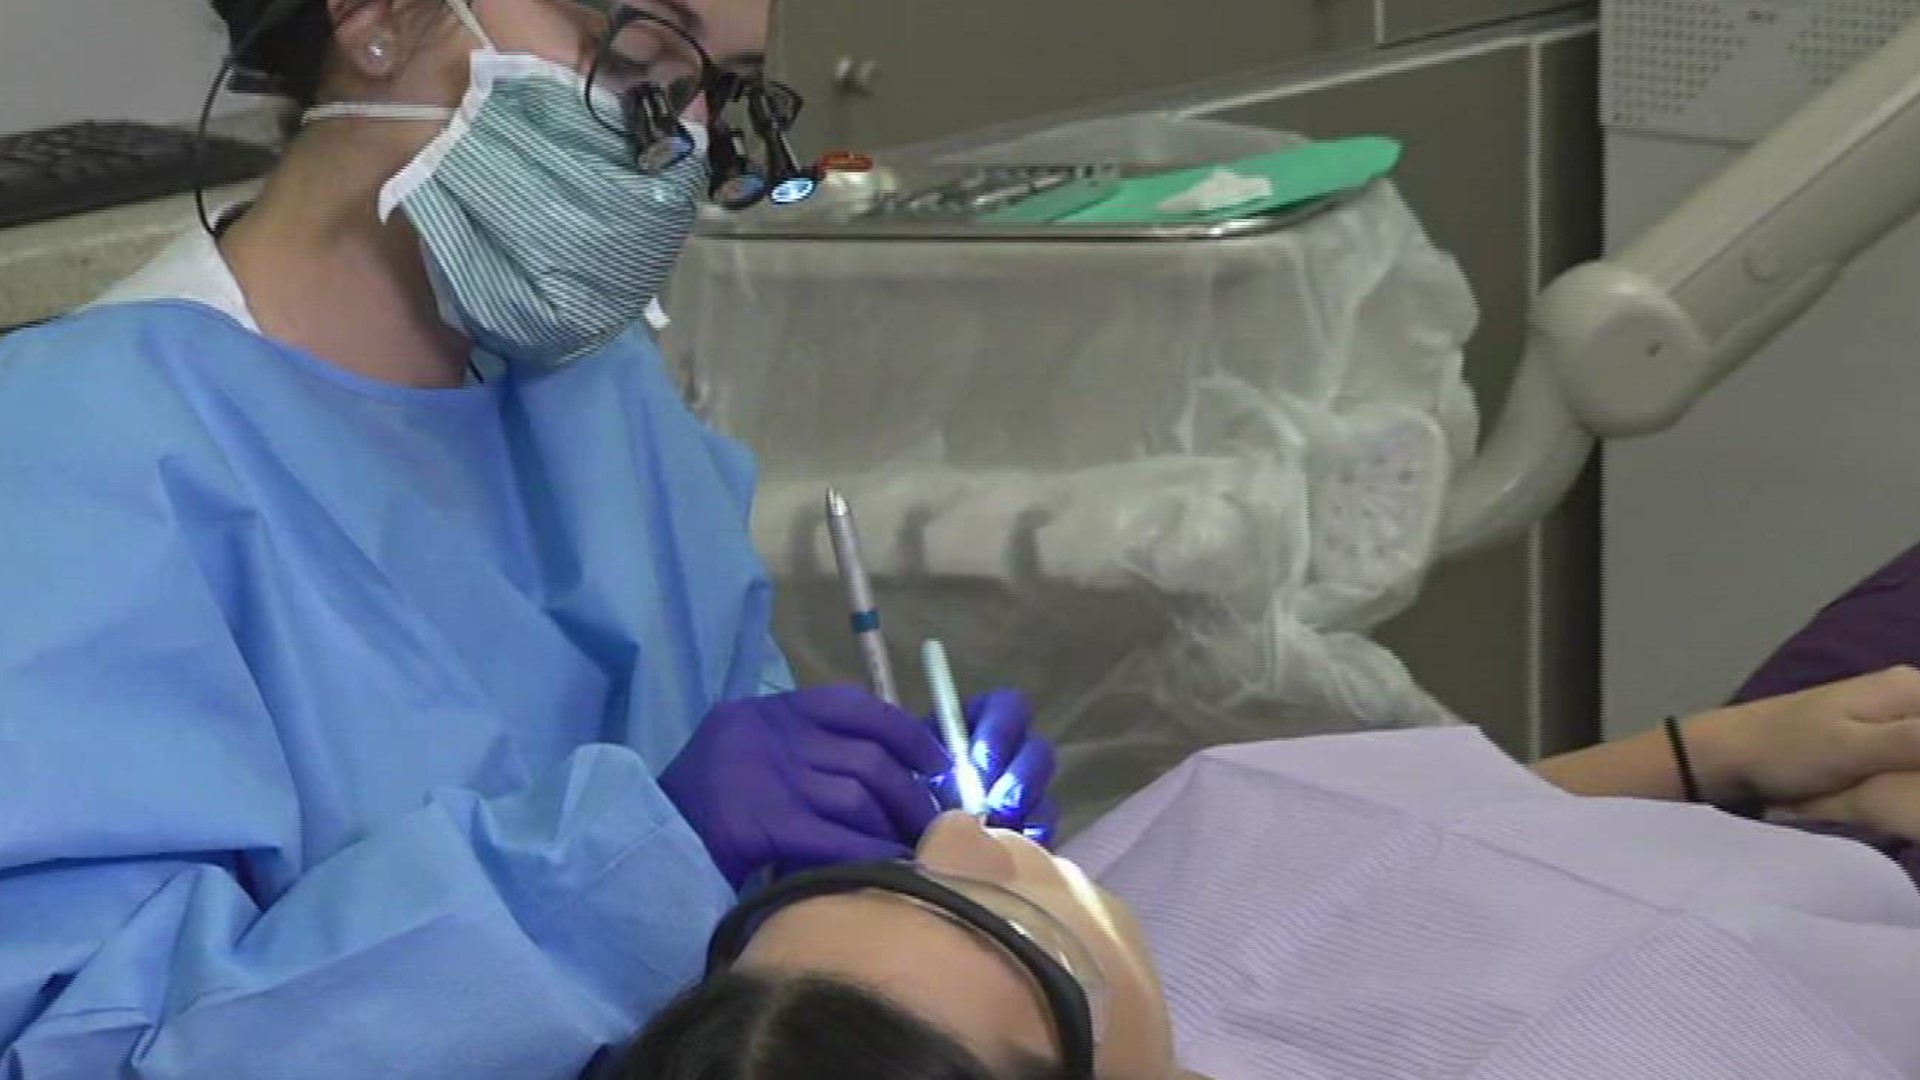 From now until December, Del Mar College's Dental Hygiene program is encouraging people to apply to get a free dental checkup from their students.